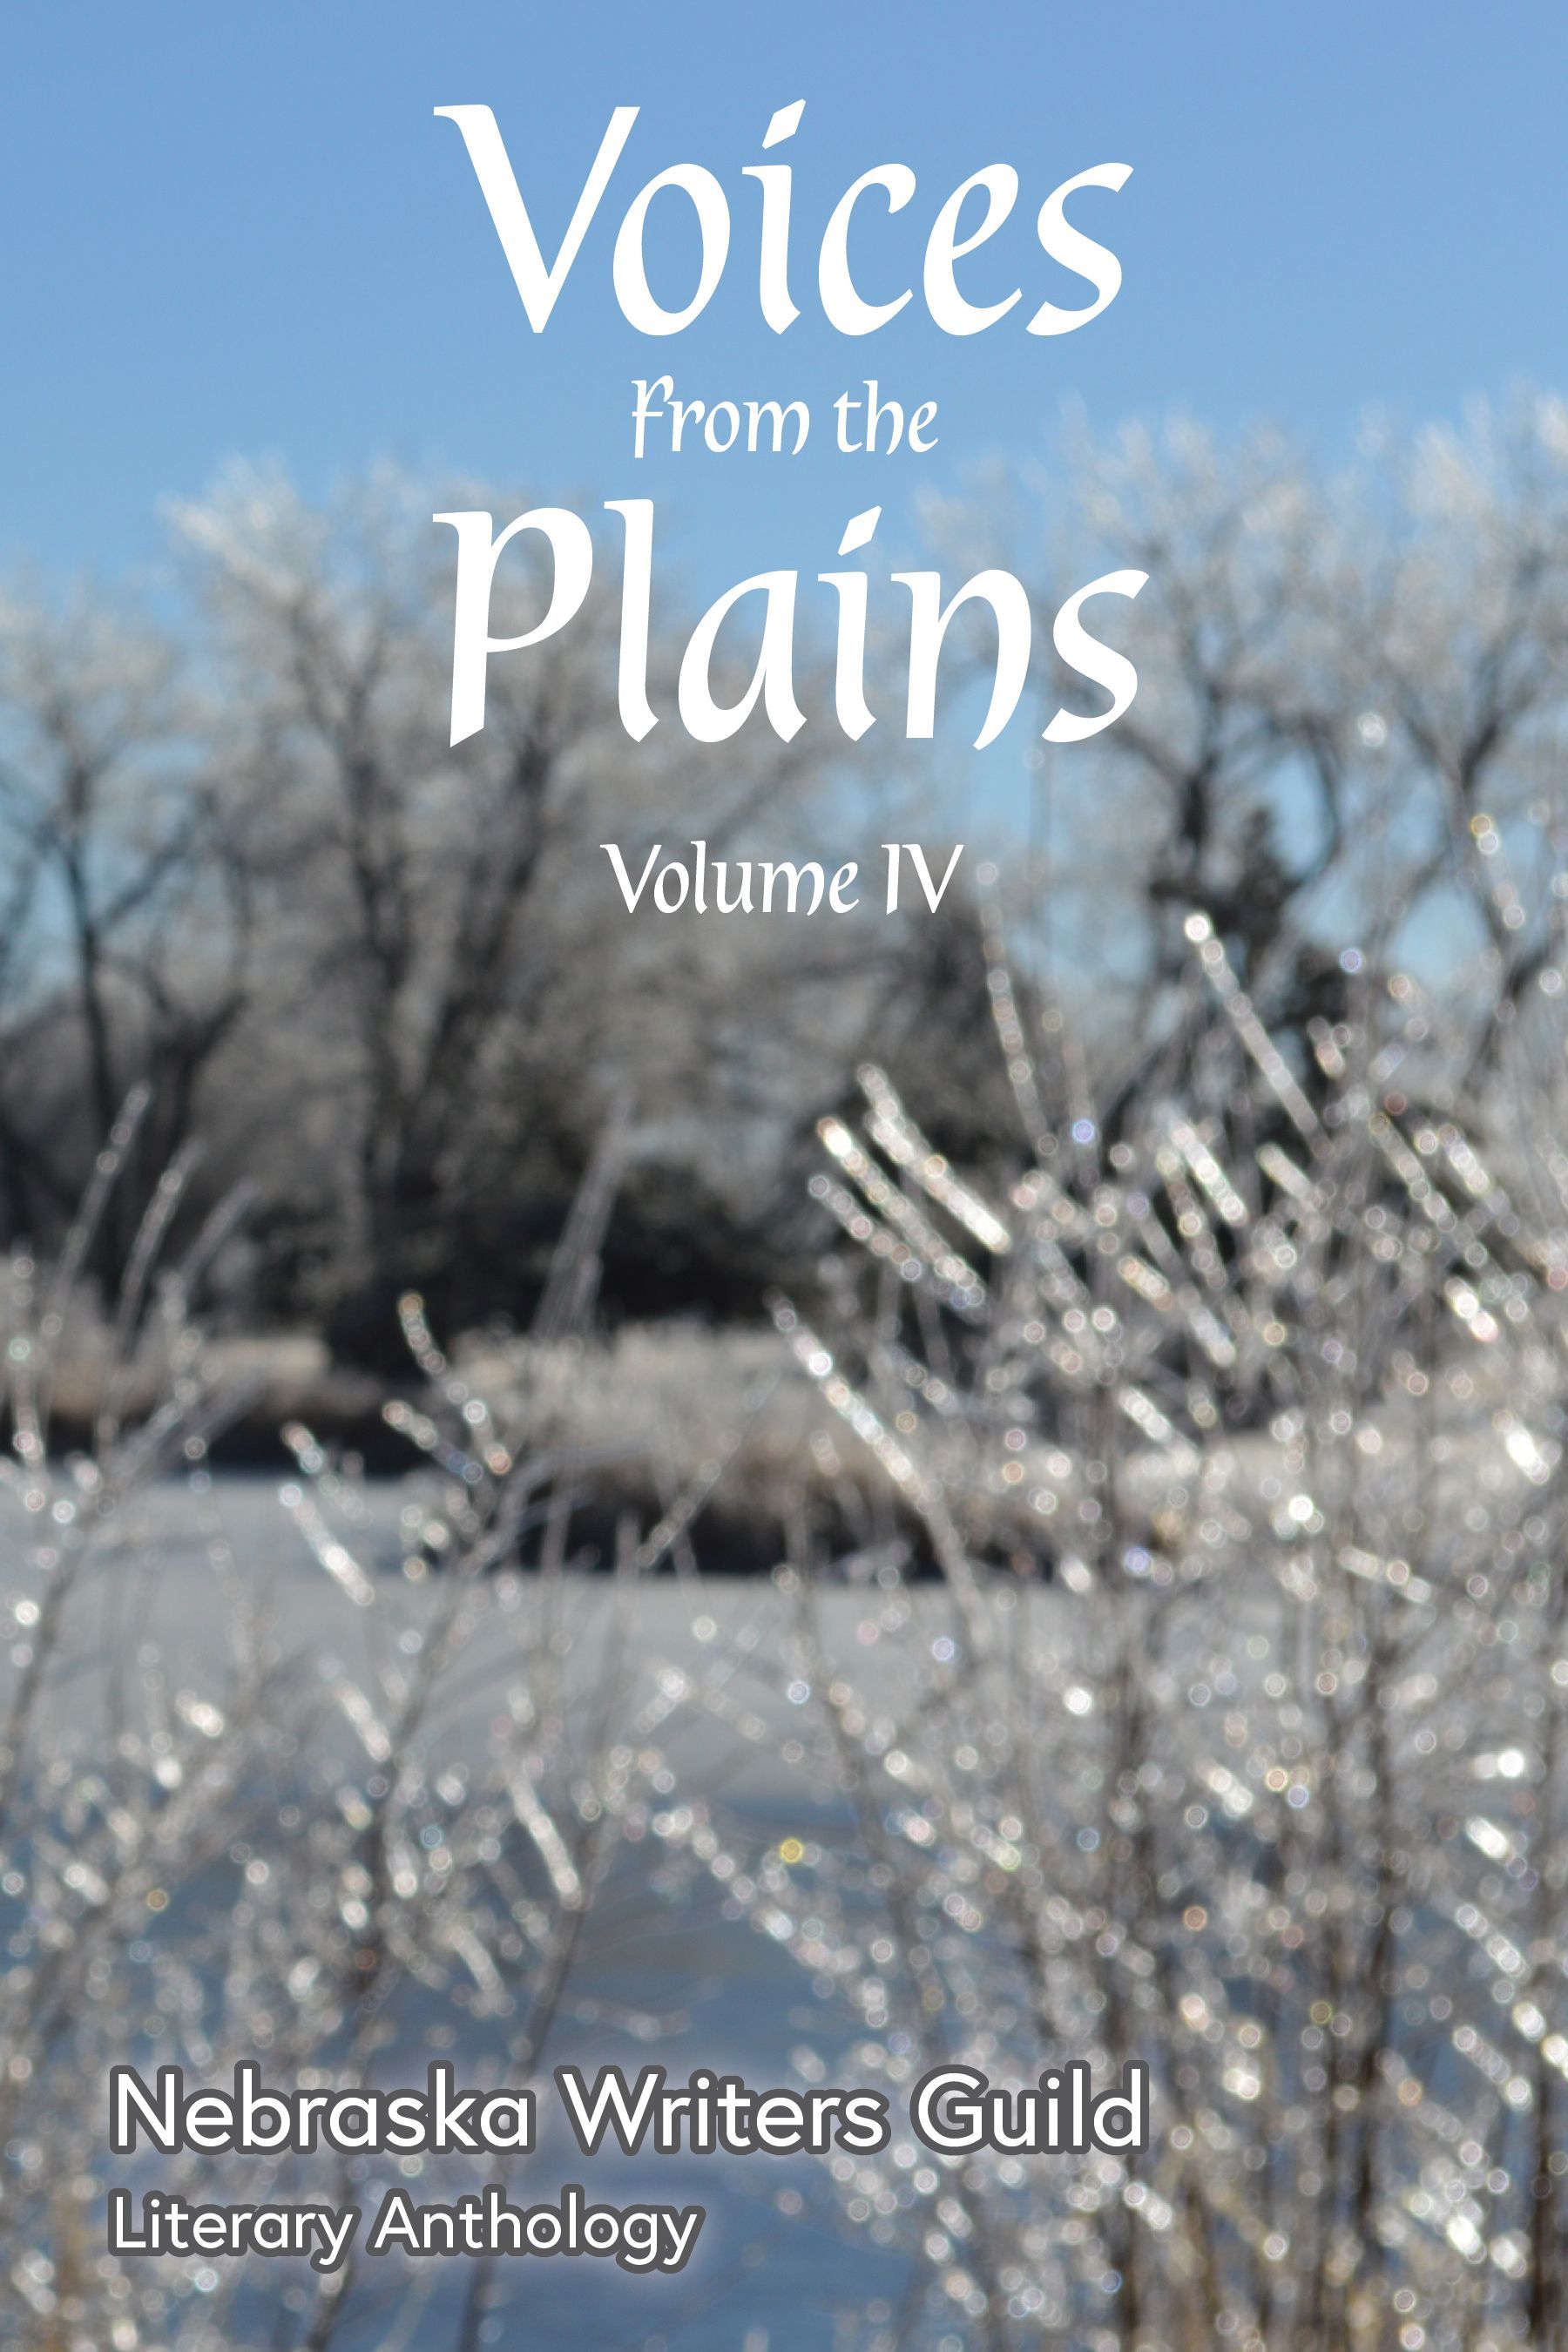 Voices from the Plains